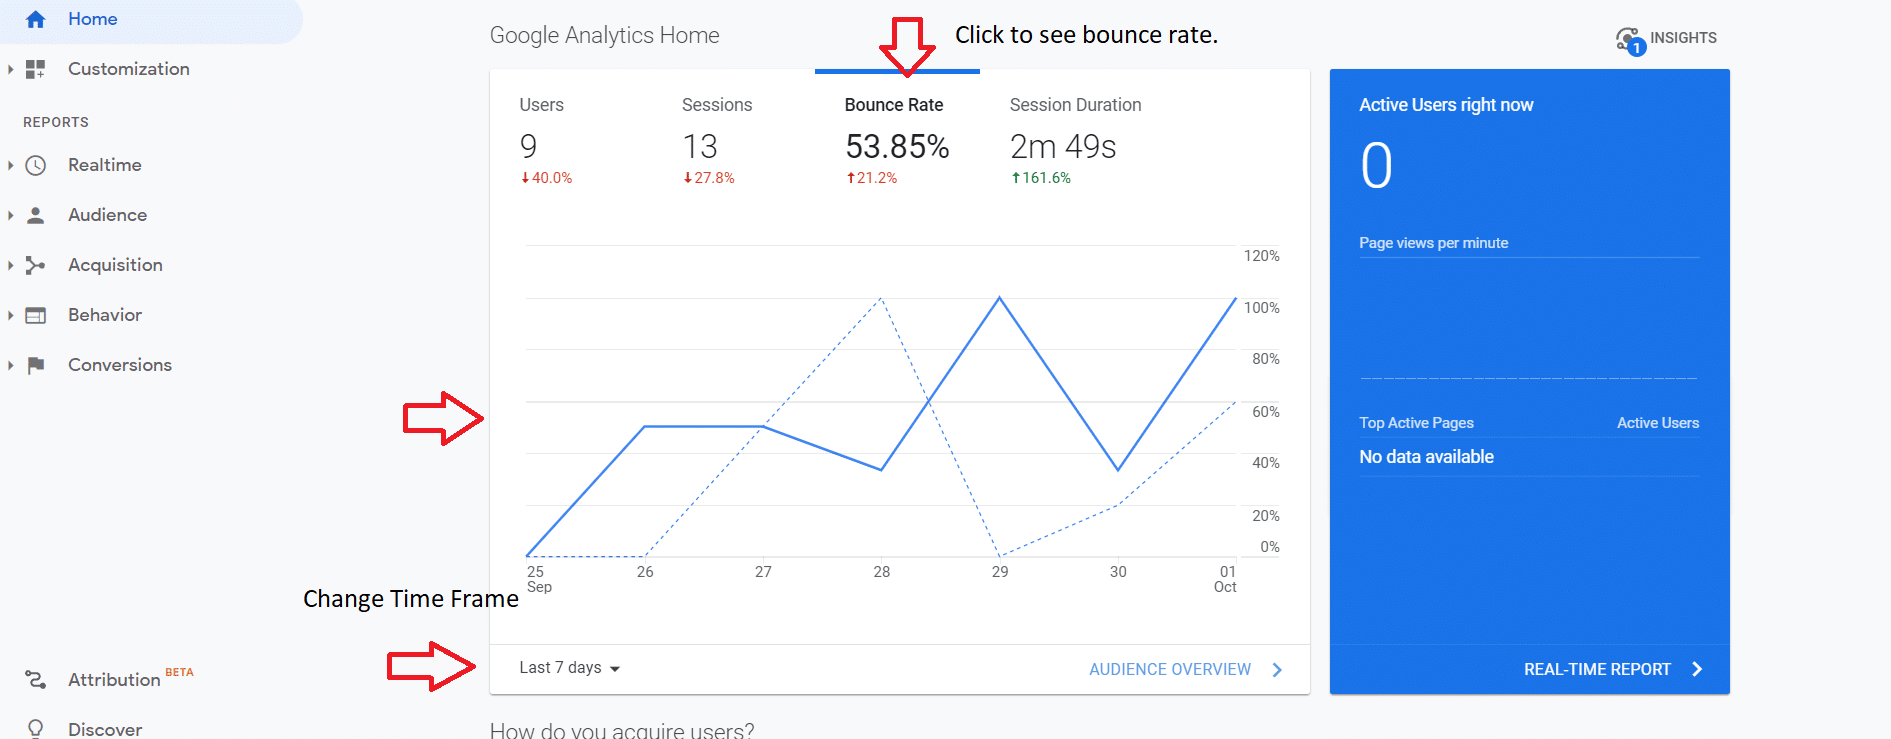 Google analytics things to track bounce rate section.